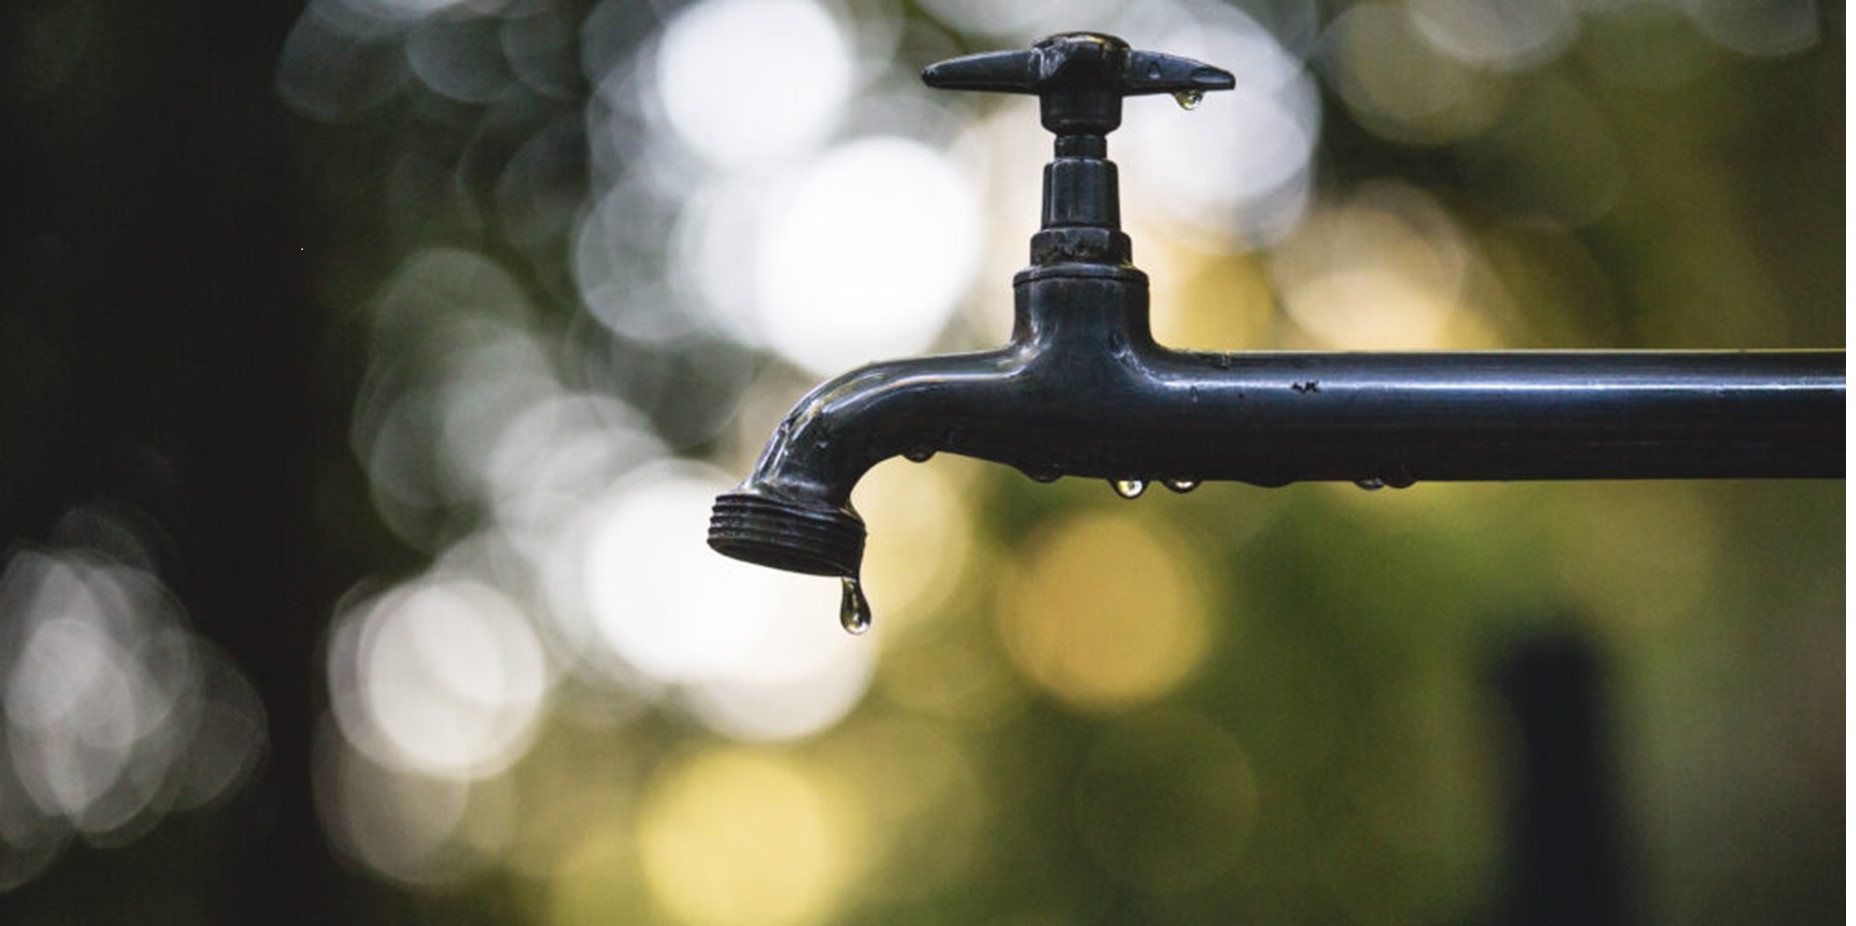 Image of water tap